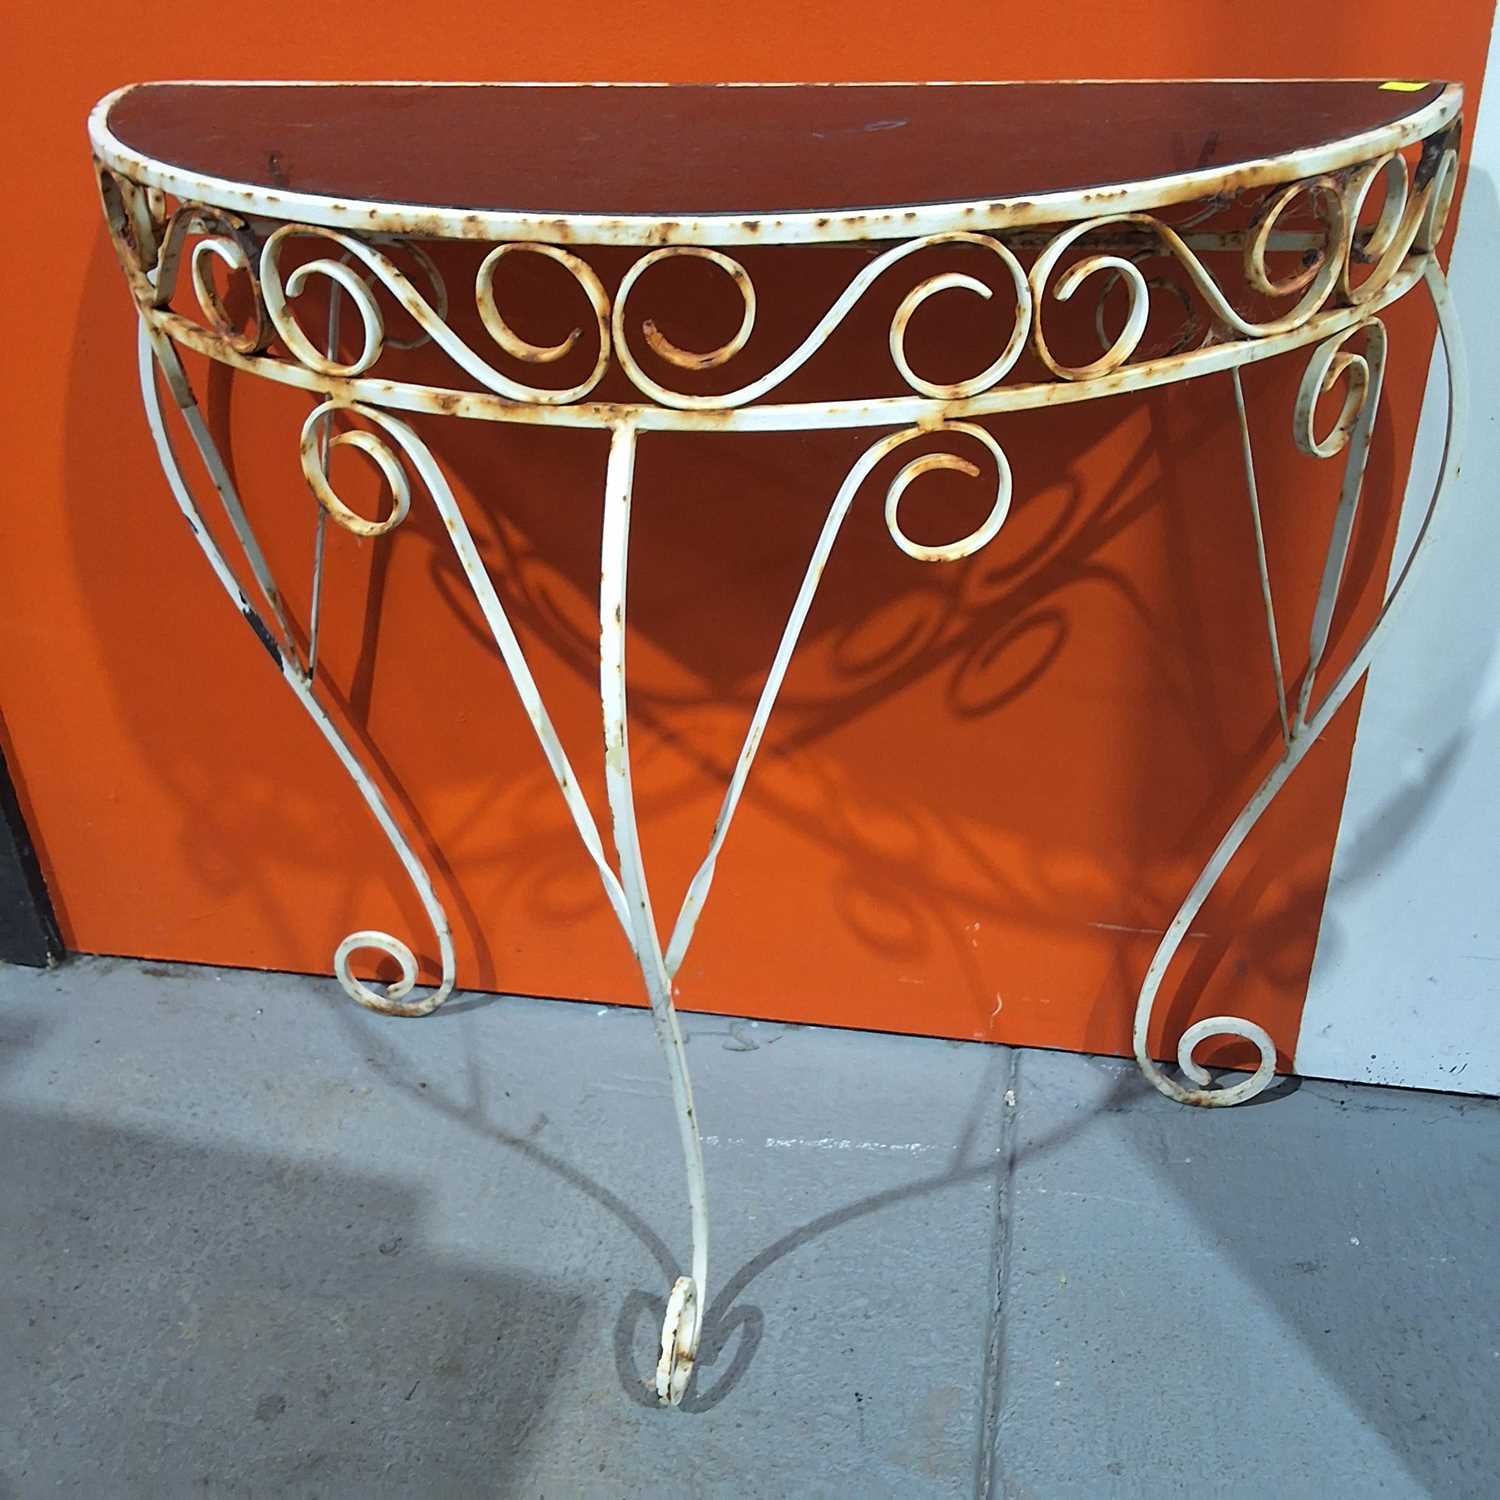 Lot 184 - PATIO TABLE